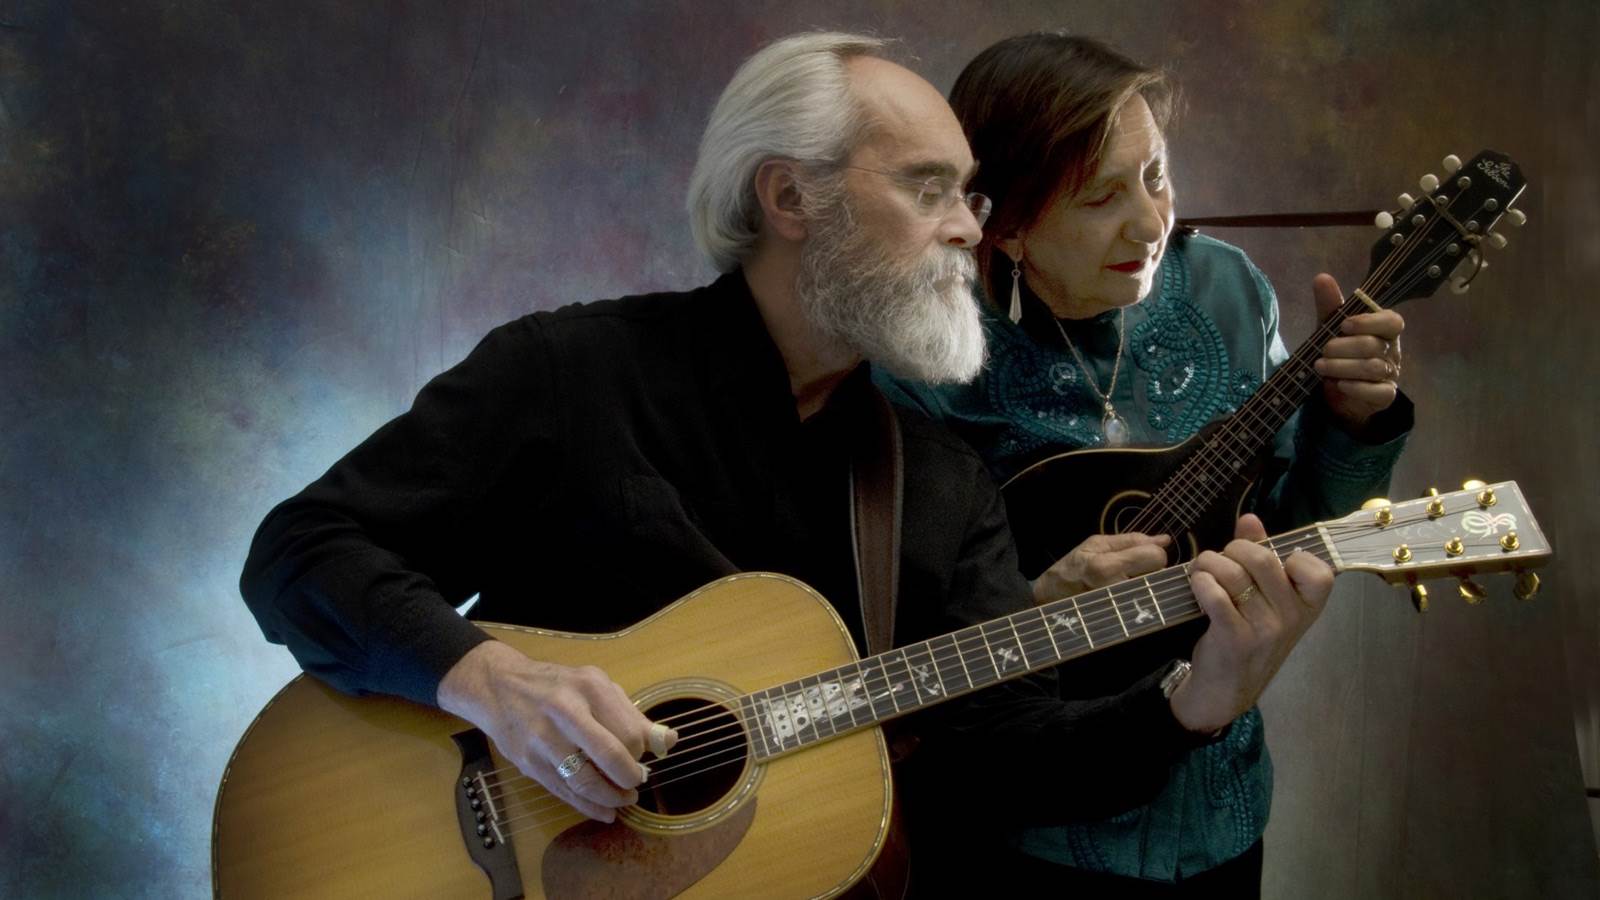 Two artists with their acoustic guitars looking to the right. One artist is wearing black and has a grey beard and hair. The other artist is behind him, she is wearing a denim jacket and playing the guitar.